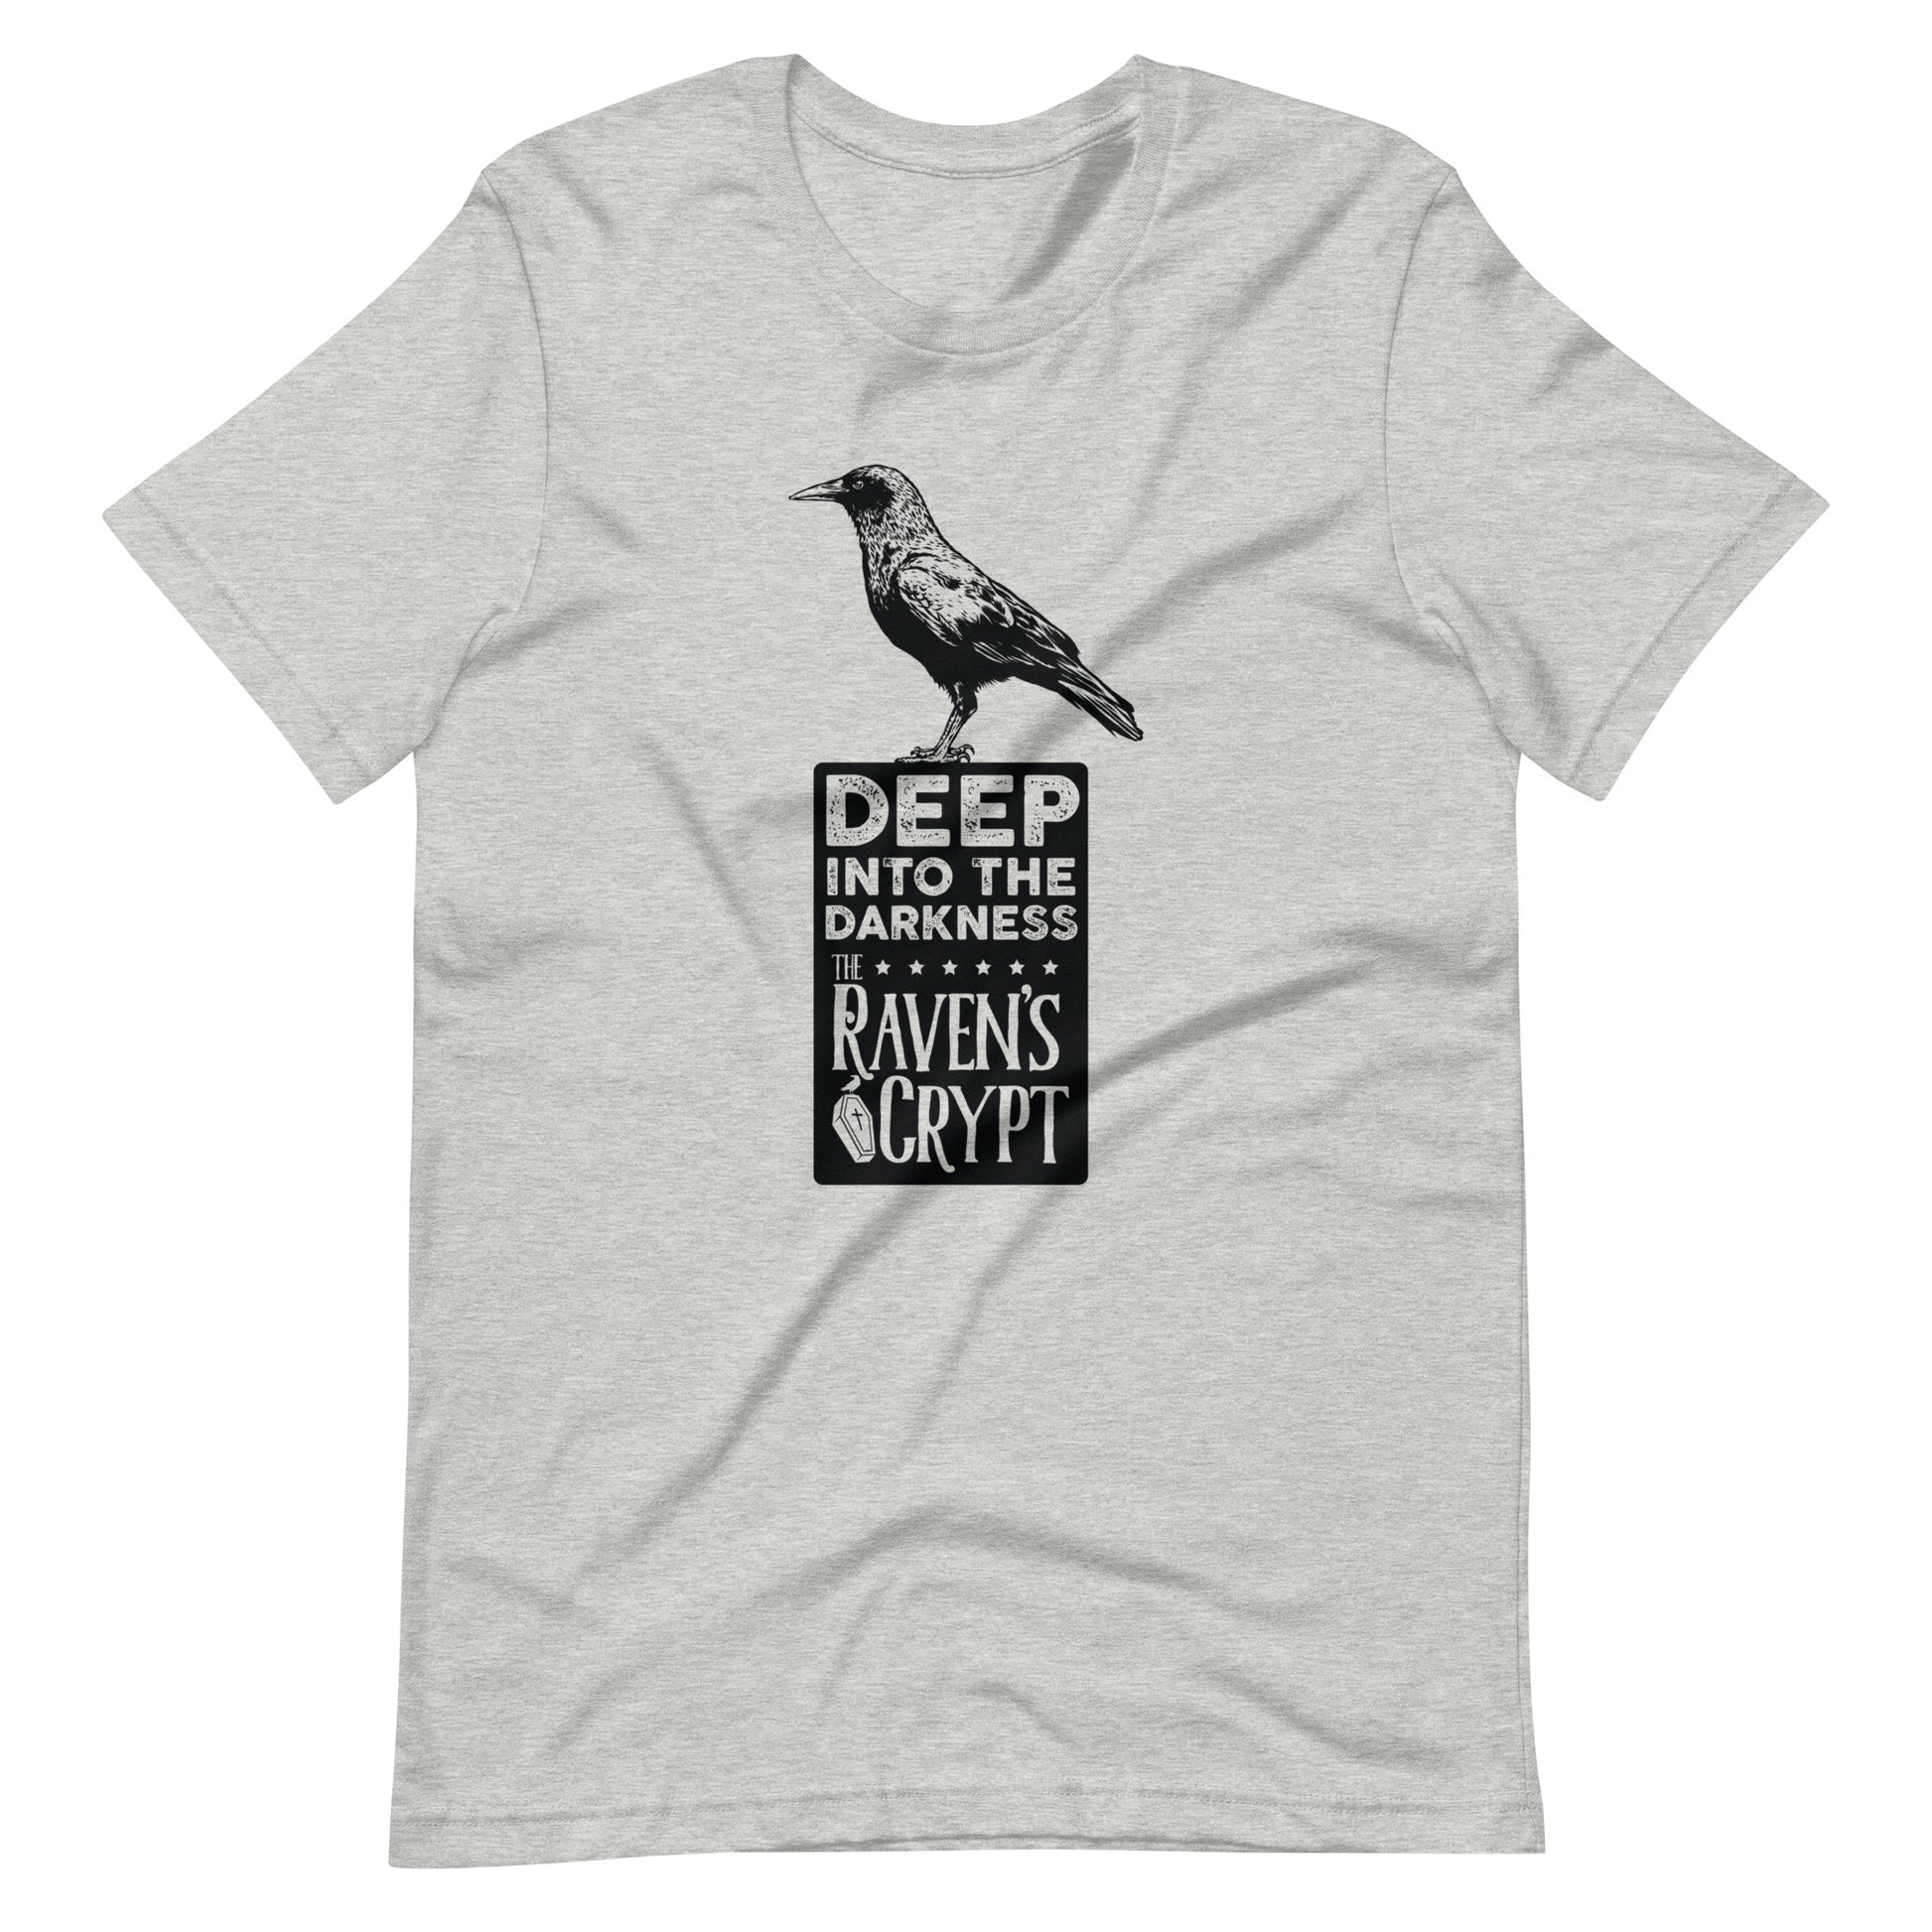 Deep Into the Darkness Crypt 2 - Men's t-shirt - Athletic Heather Front